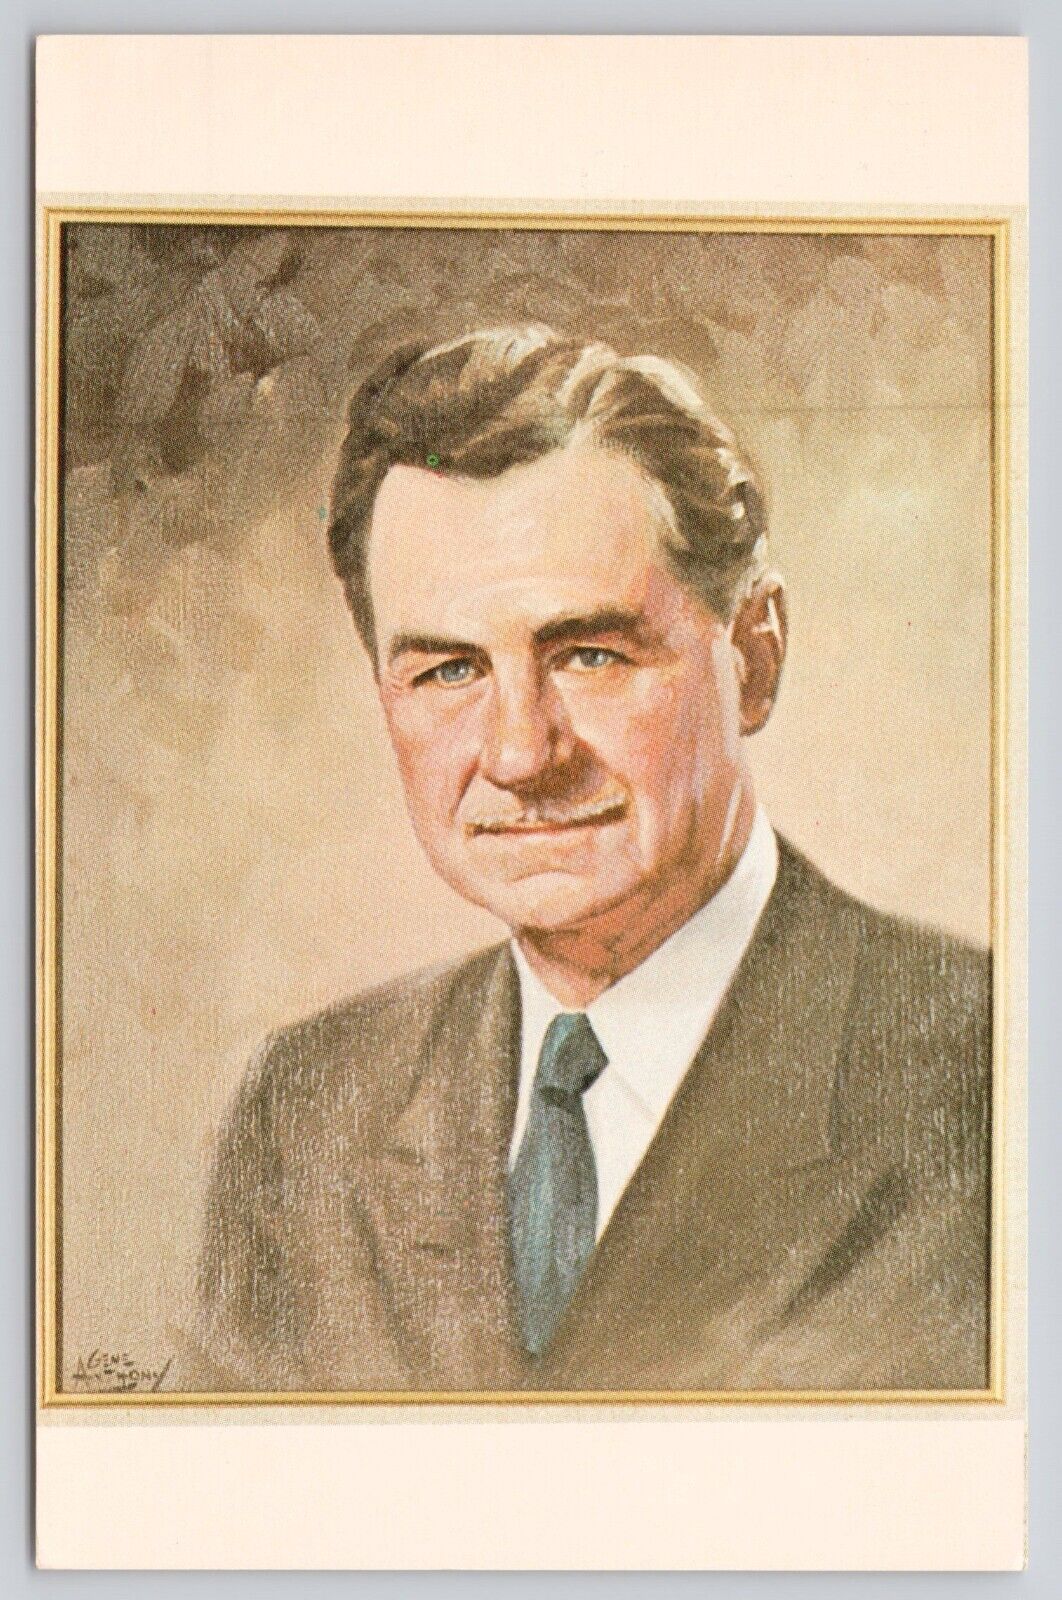 Lowell Thomas Greenville Ohio OH American Writer and Broadcaster Postcard